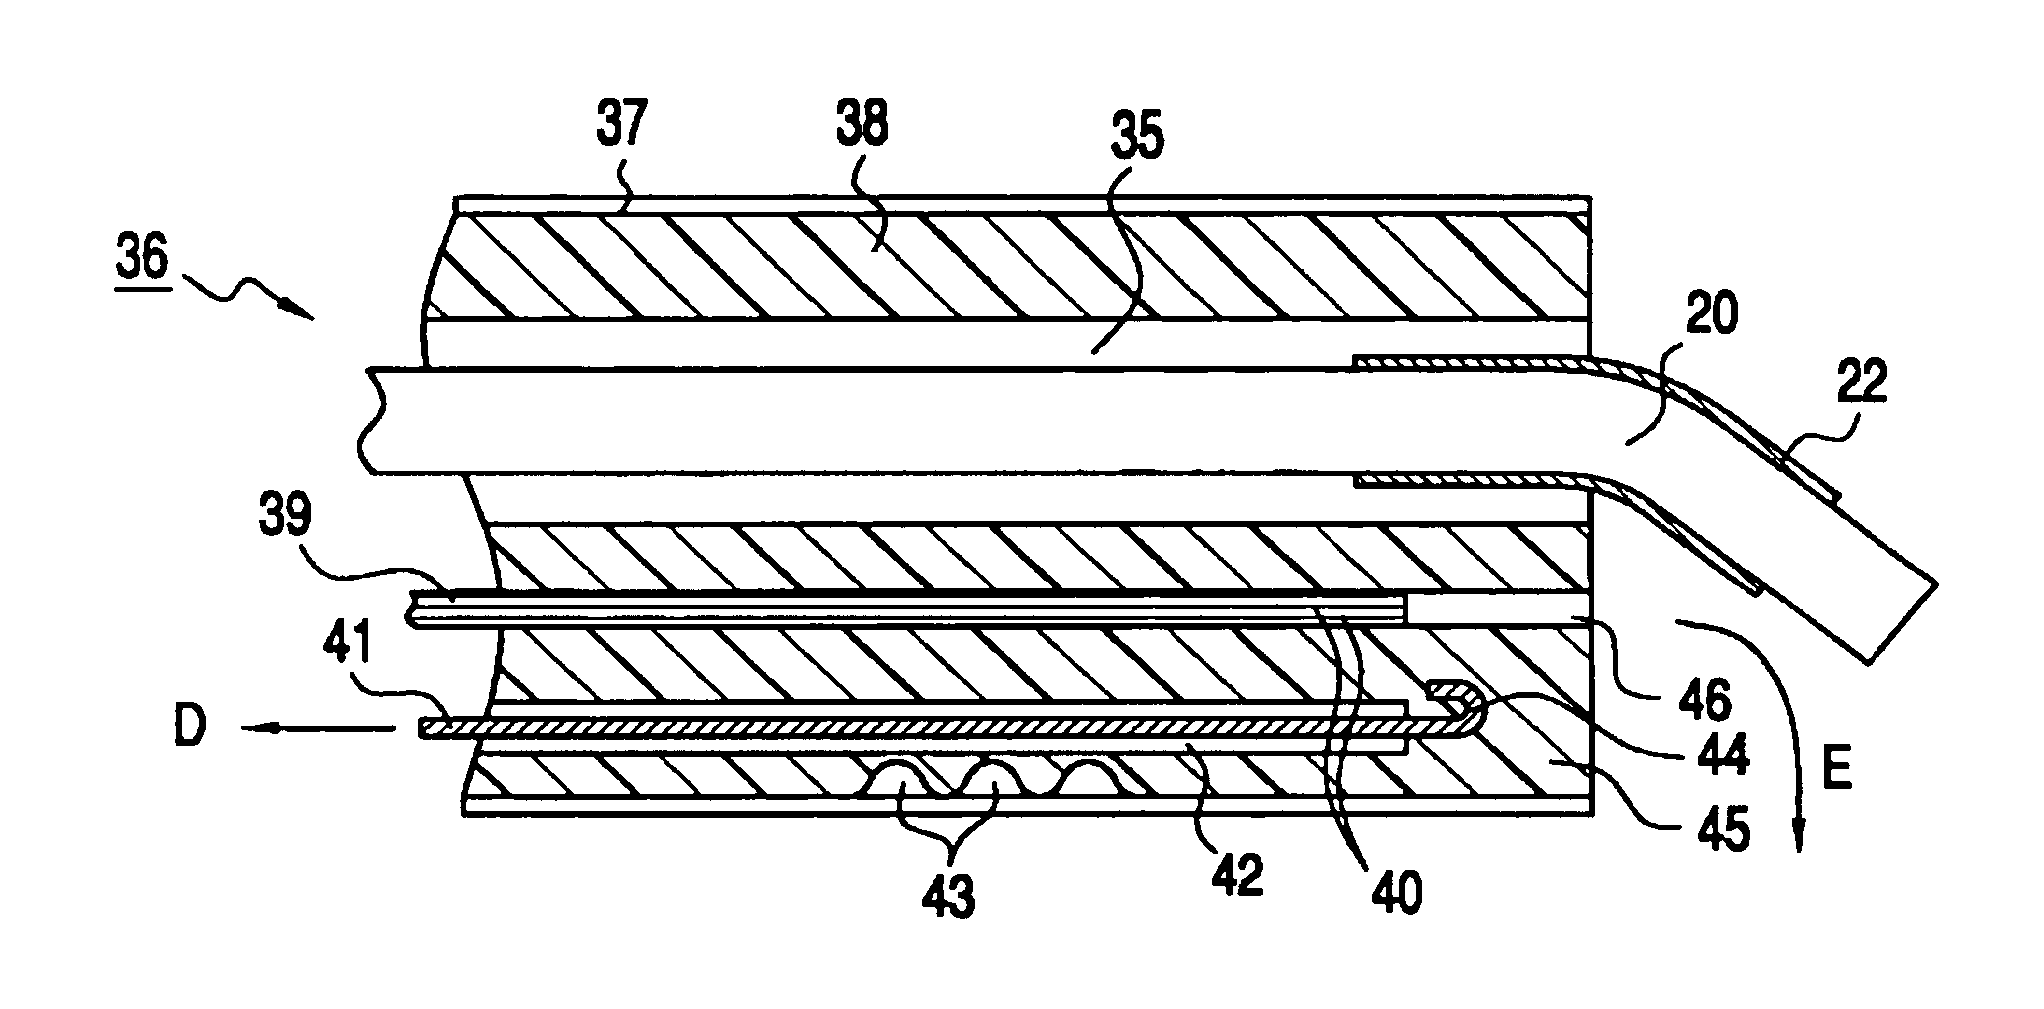 Deflection mechanism for a surgical instrument, such as a laser delivery device and/or endoscope, and method of use